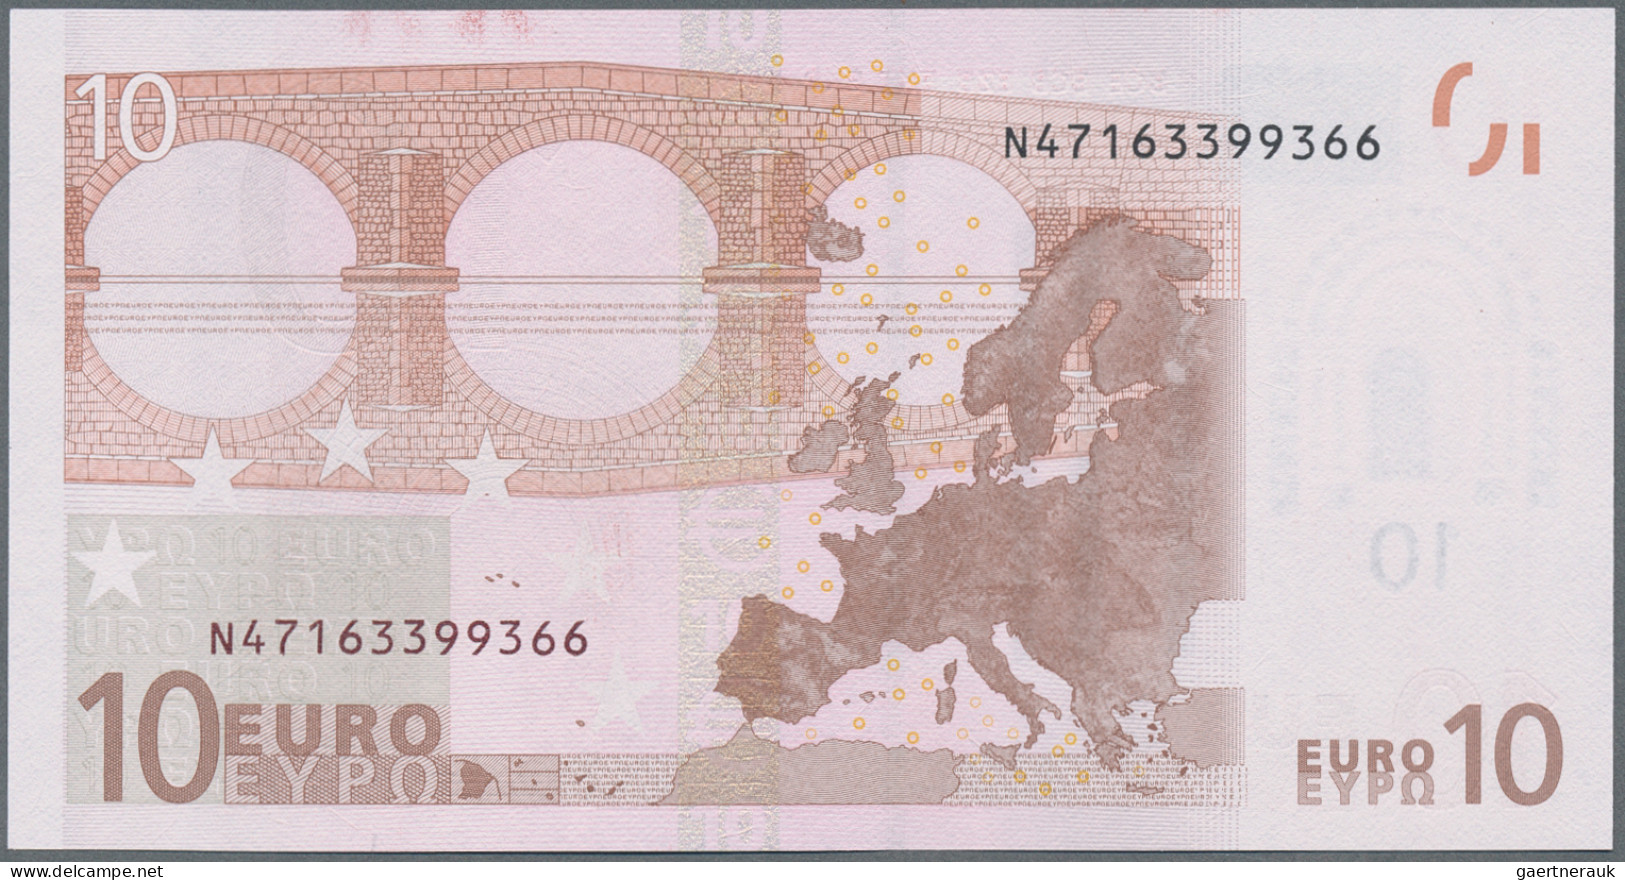 Euro Bank Notes: European Central Bank, lot with 5 banknotes and 2 advertising n